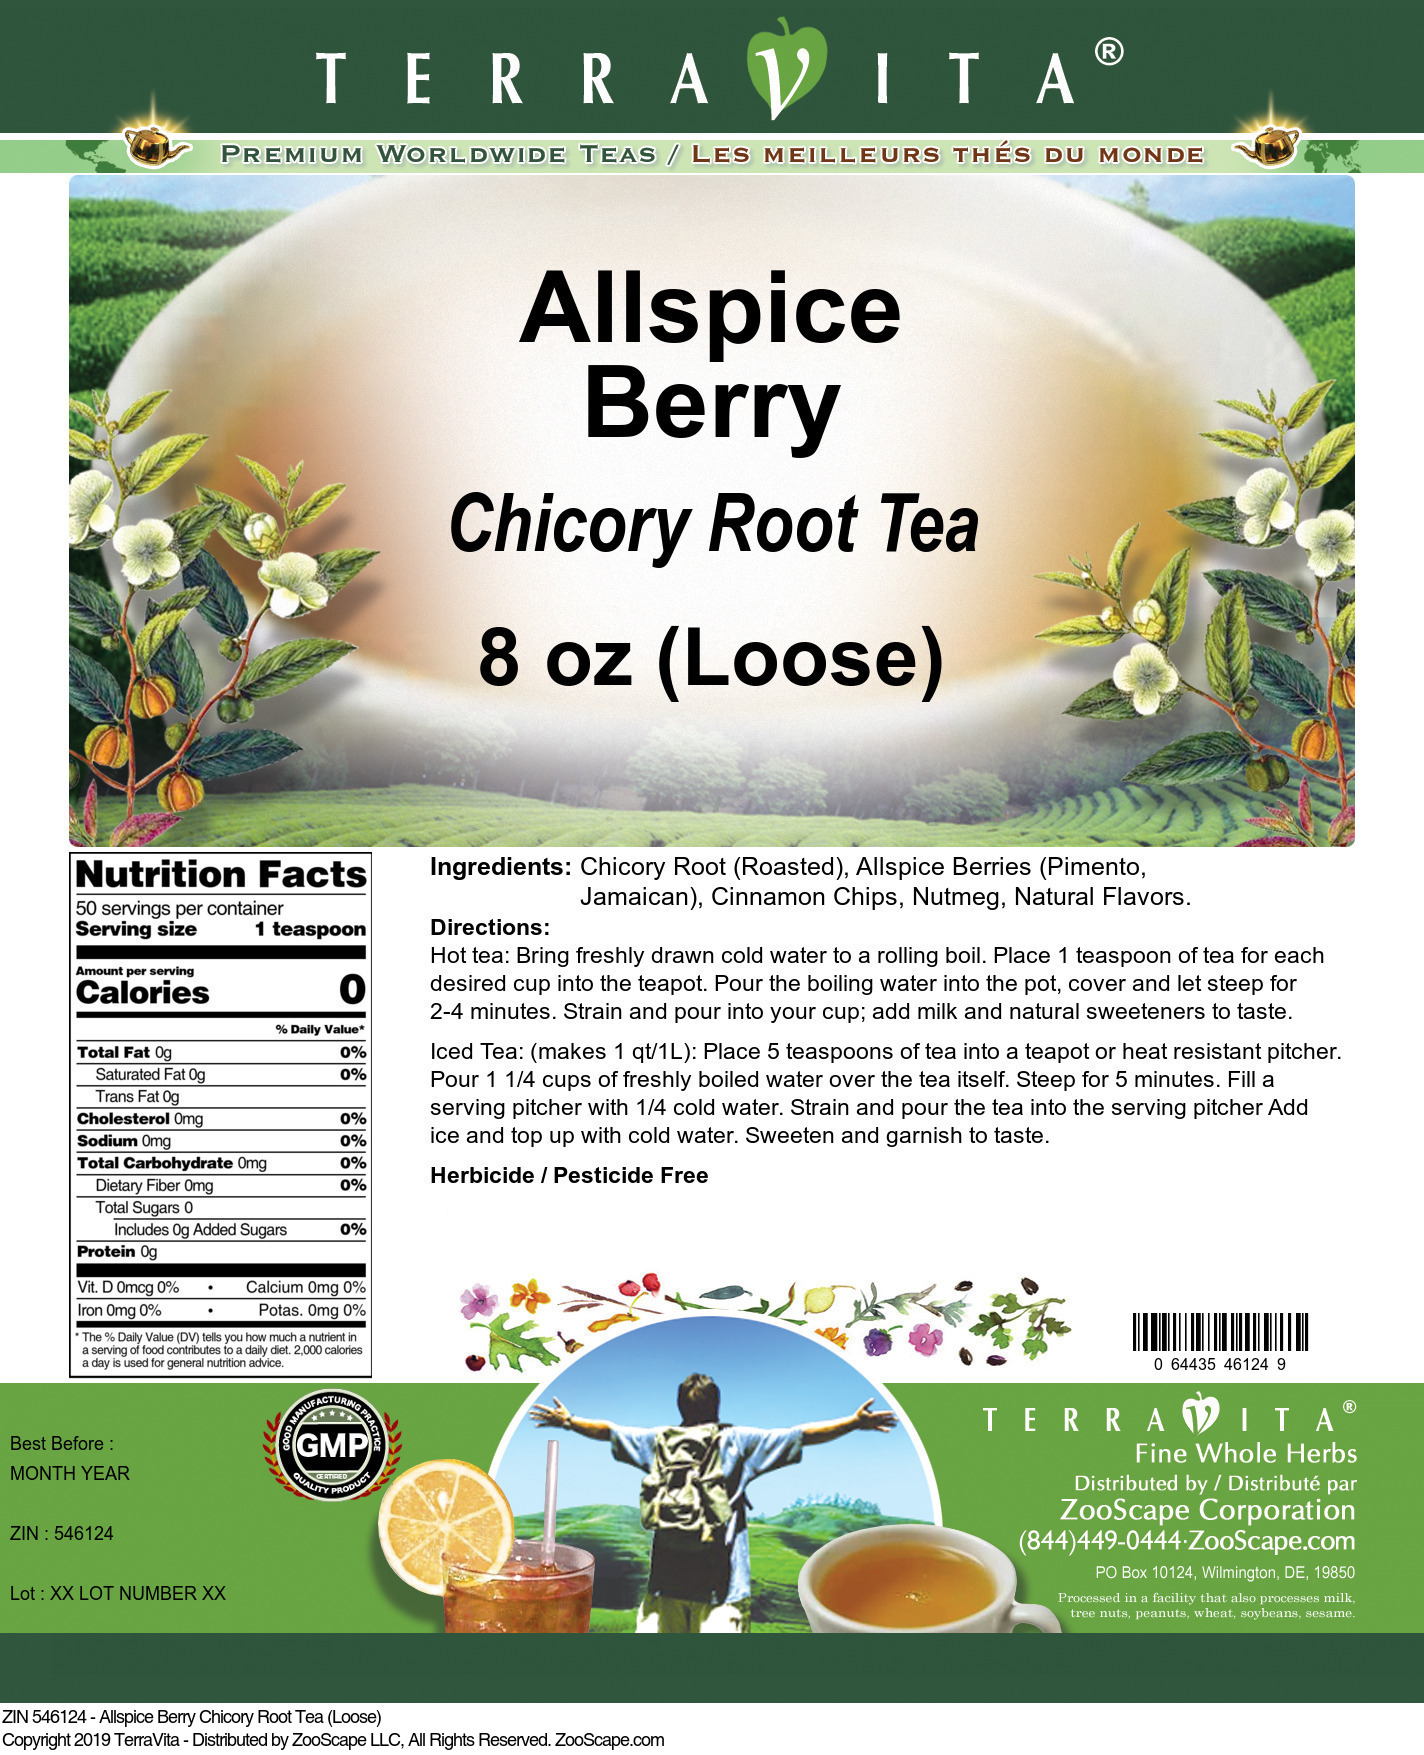 Allspice Berry Chicory Root Tea (Loose) - Label